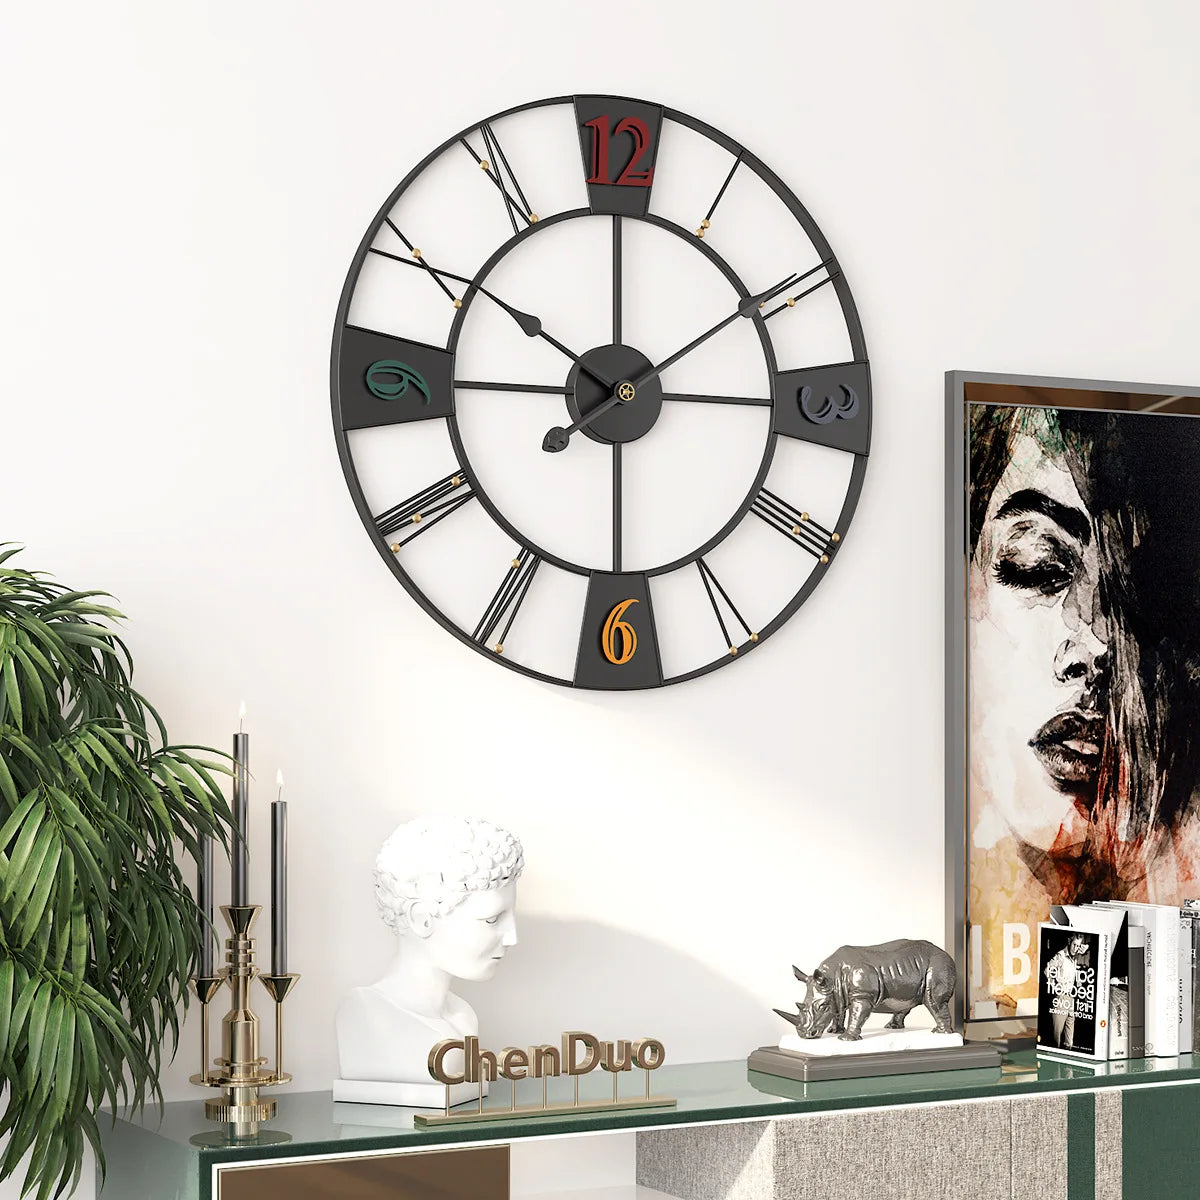 A large Roman numerals wall clock with sophistication above a modern shelf displaying decorative items and artwork.